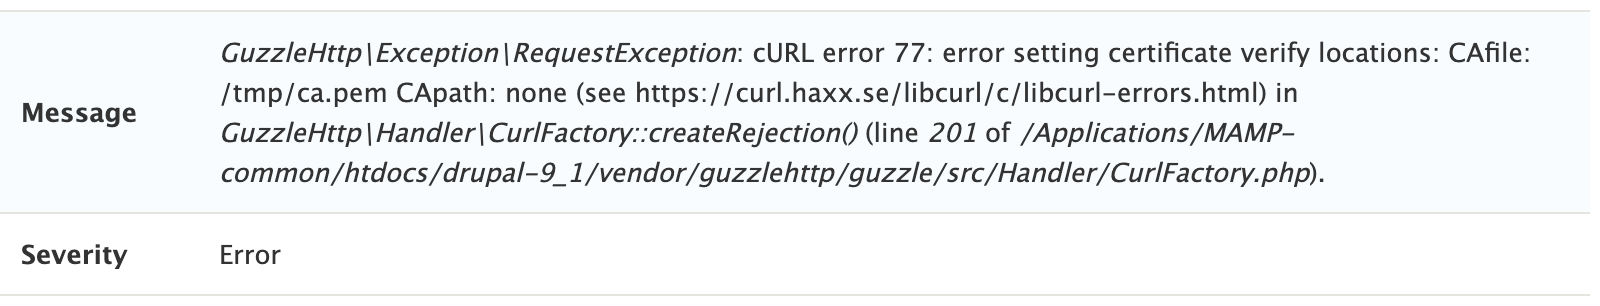 Error message in DB log when site can't make outbound HTTPS request